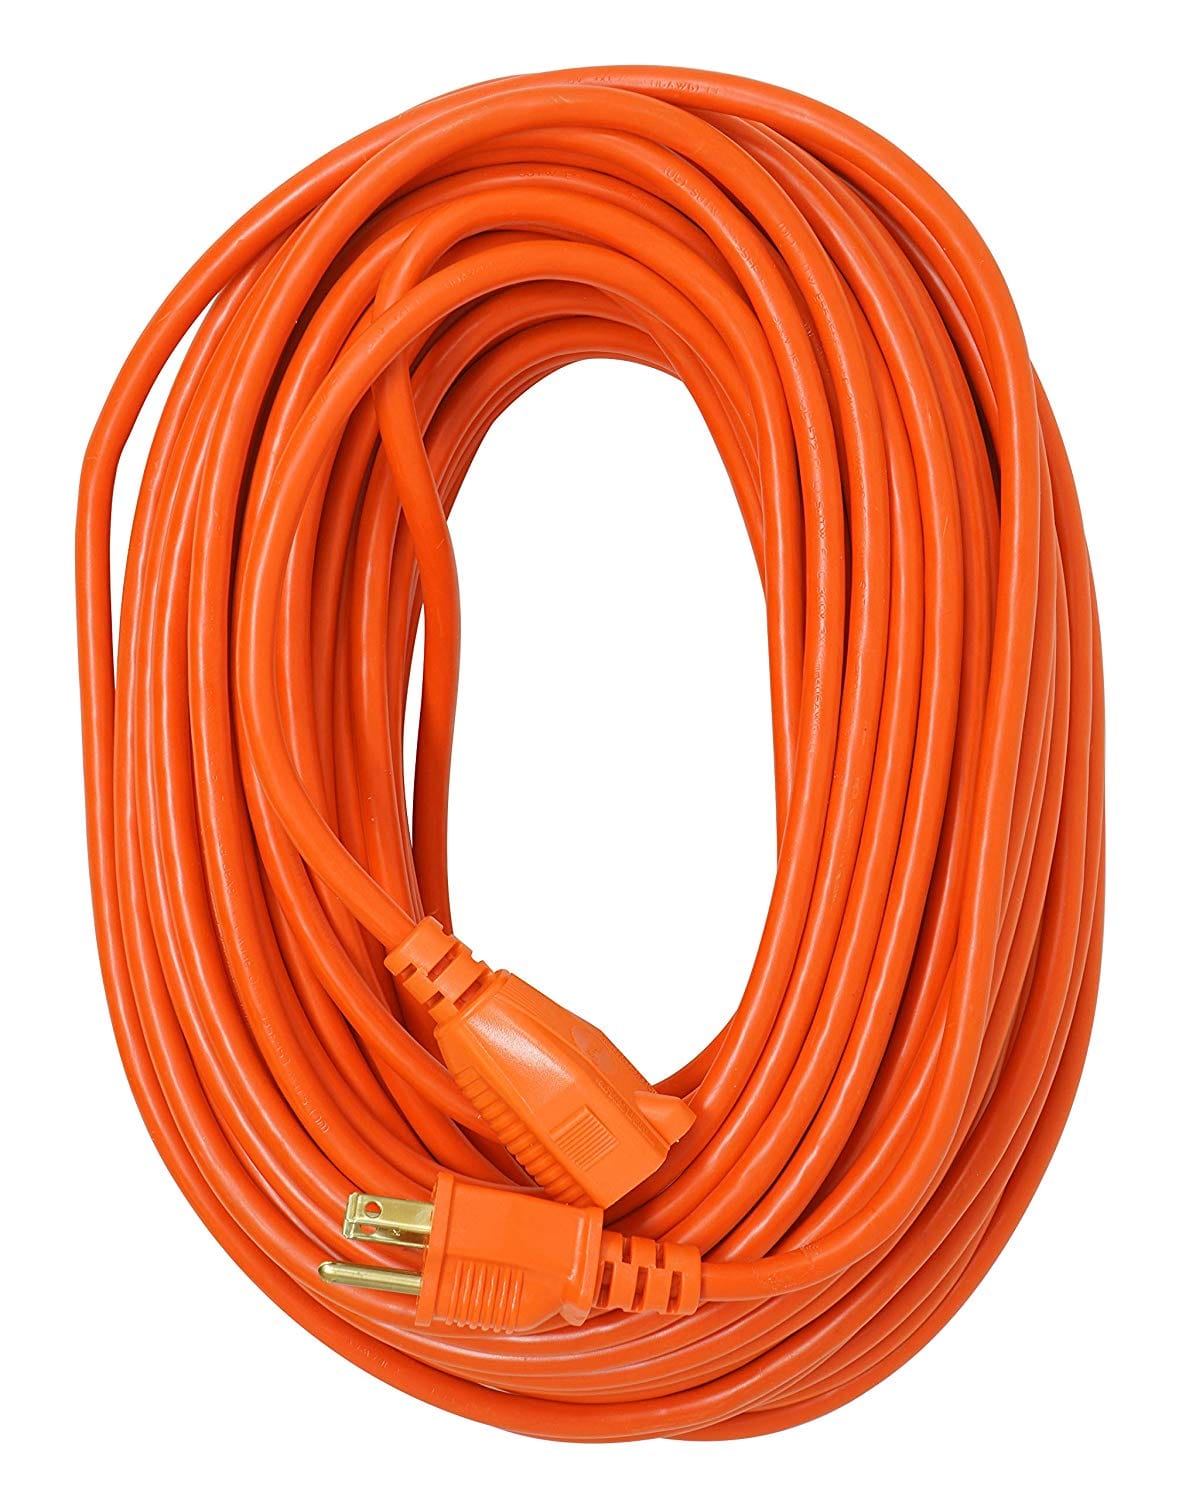 Heavy Duty, Orange Cord and Cable Extension Cord (VARIOUS SIZES)